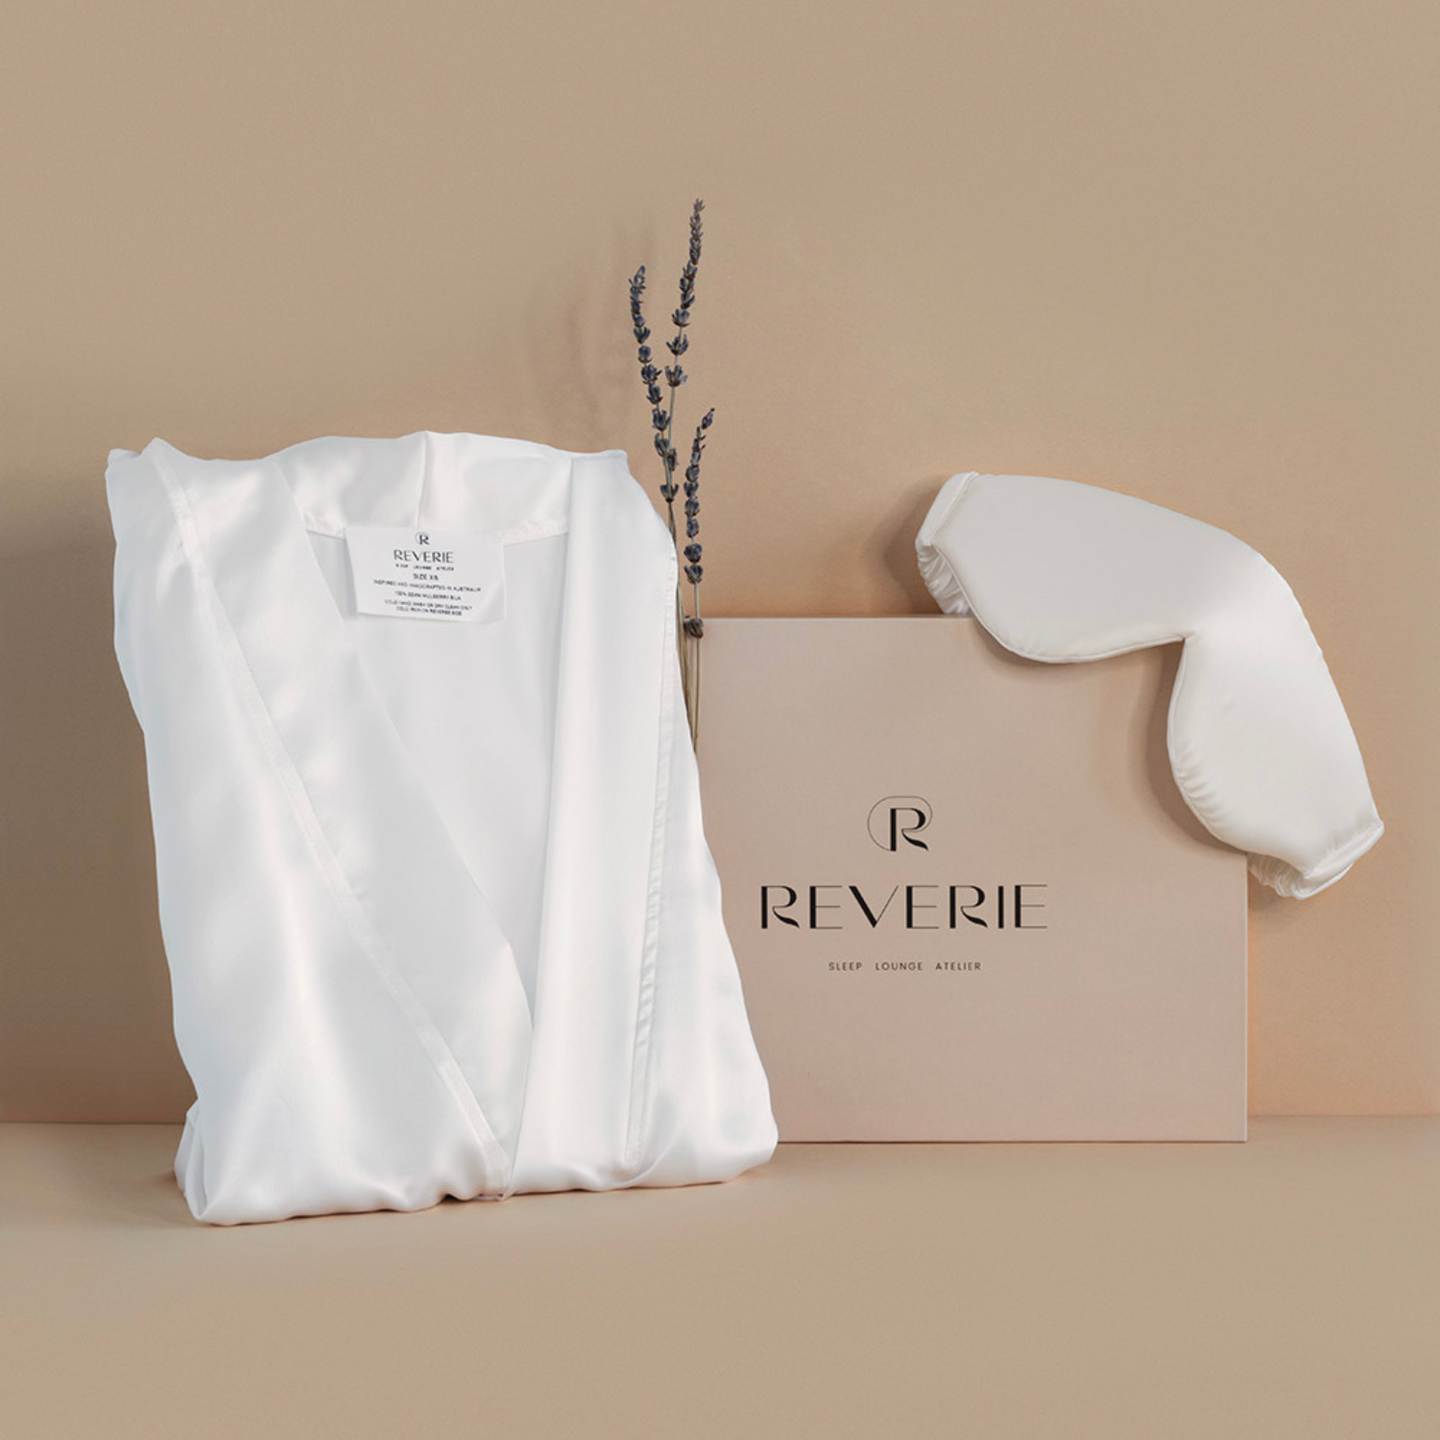 Shop Bride | Gifts for the Bride